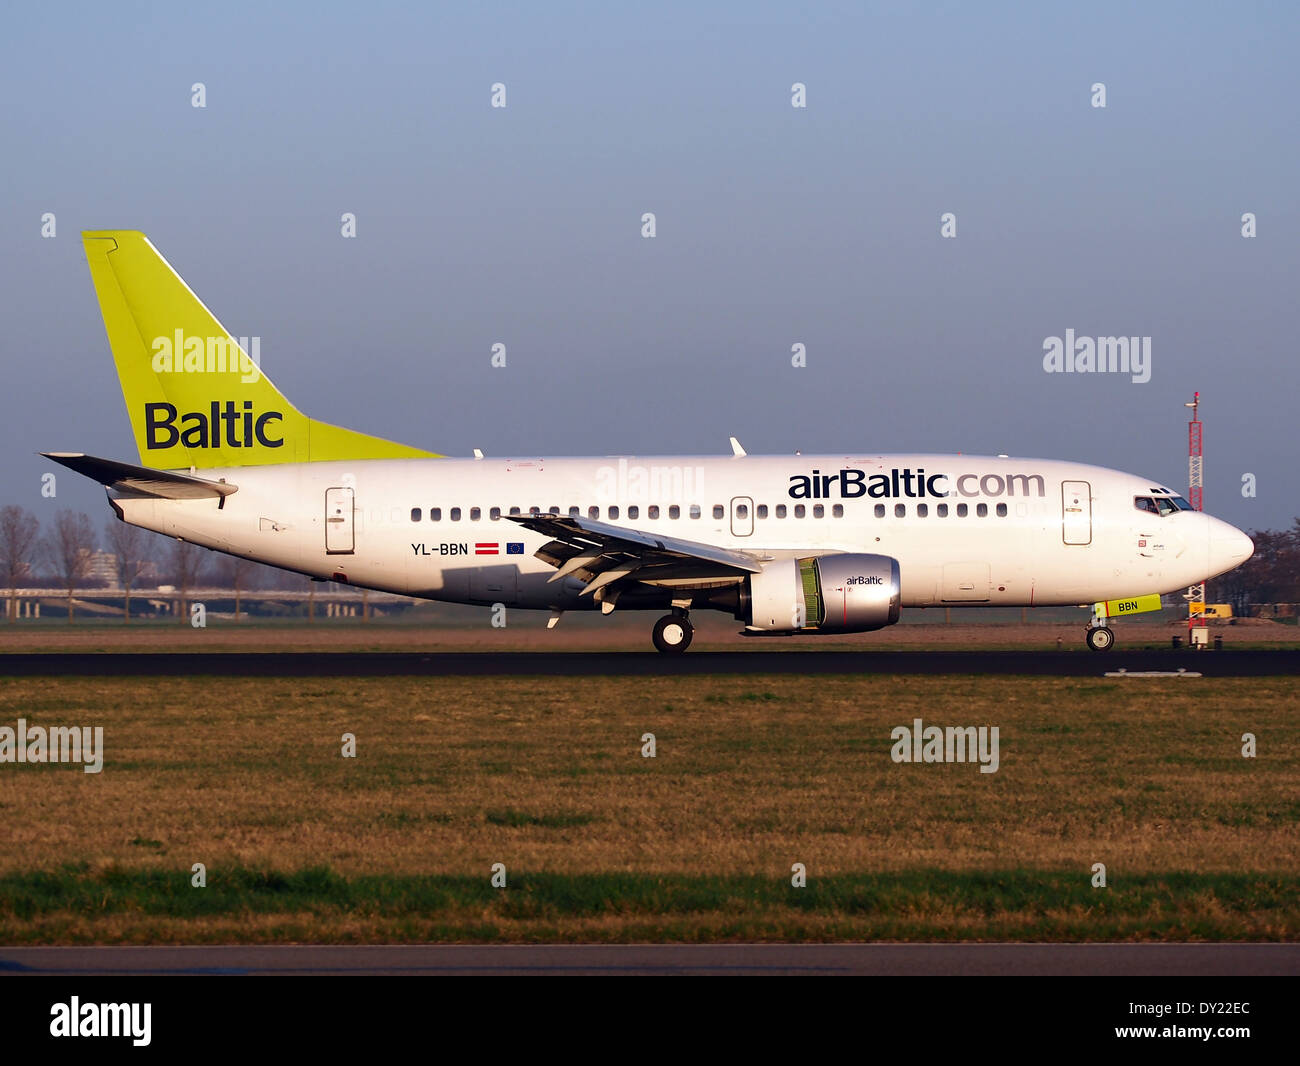 YL-BBN Air Baltic Boeing 737-522 - cn 26683, in atterraggio a AMS (Amsterdam Schiphol), pic4 Foto Stock